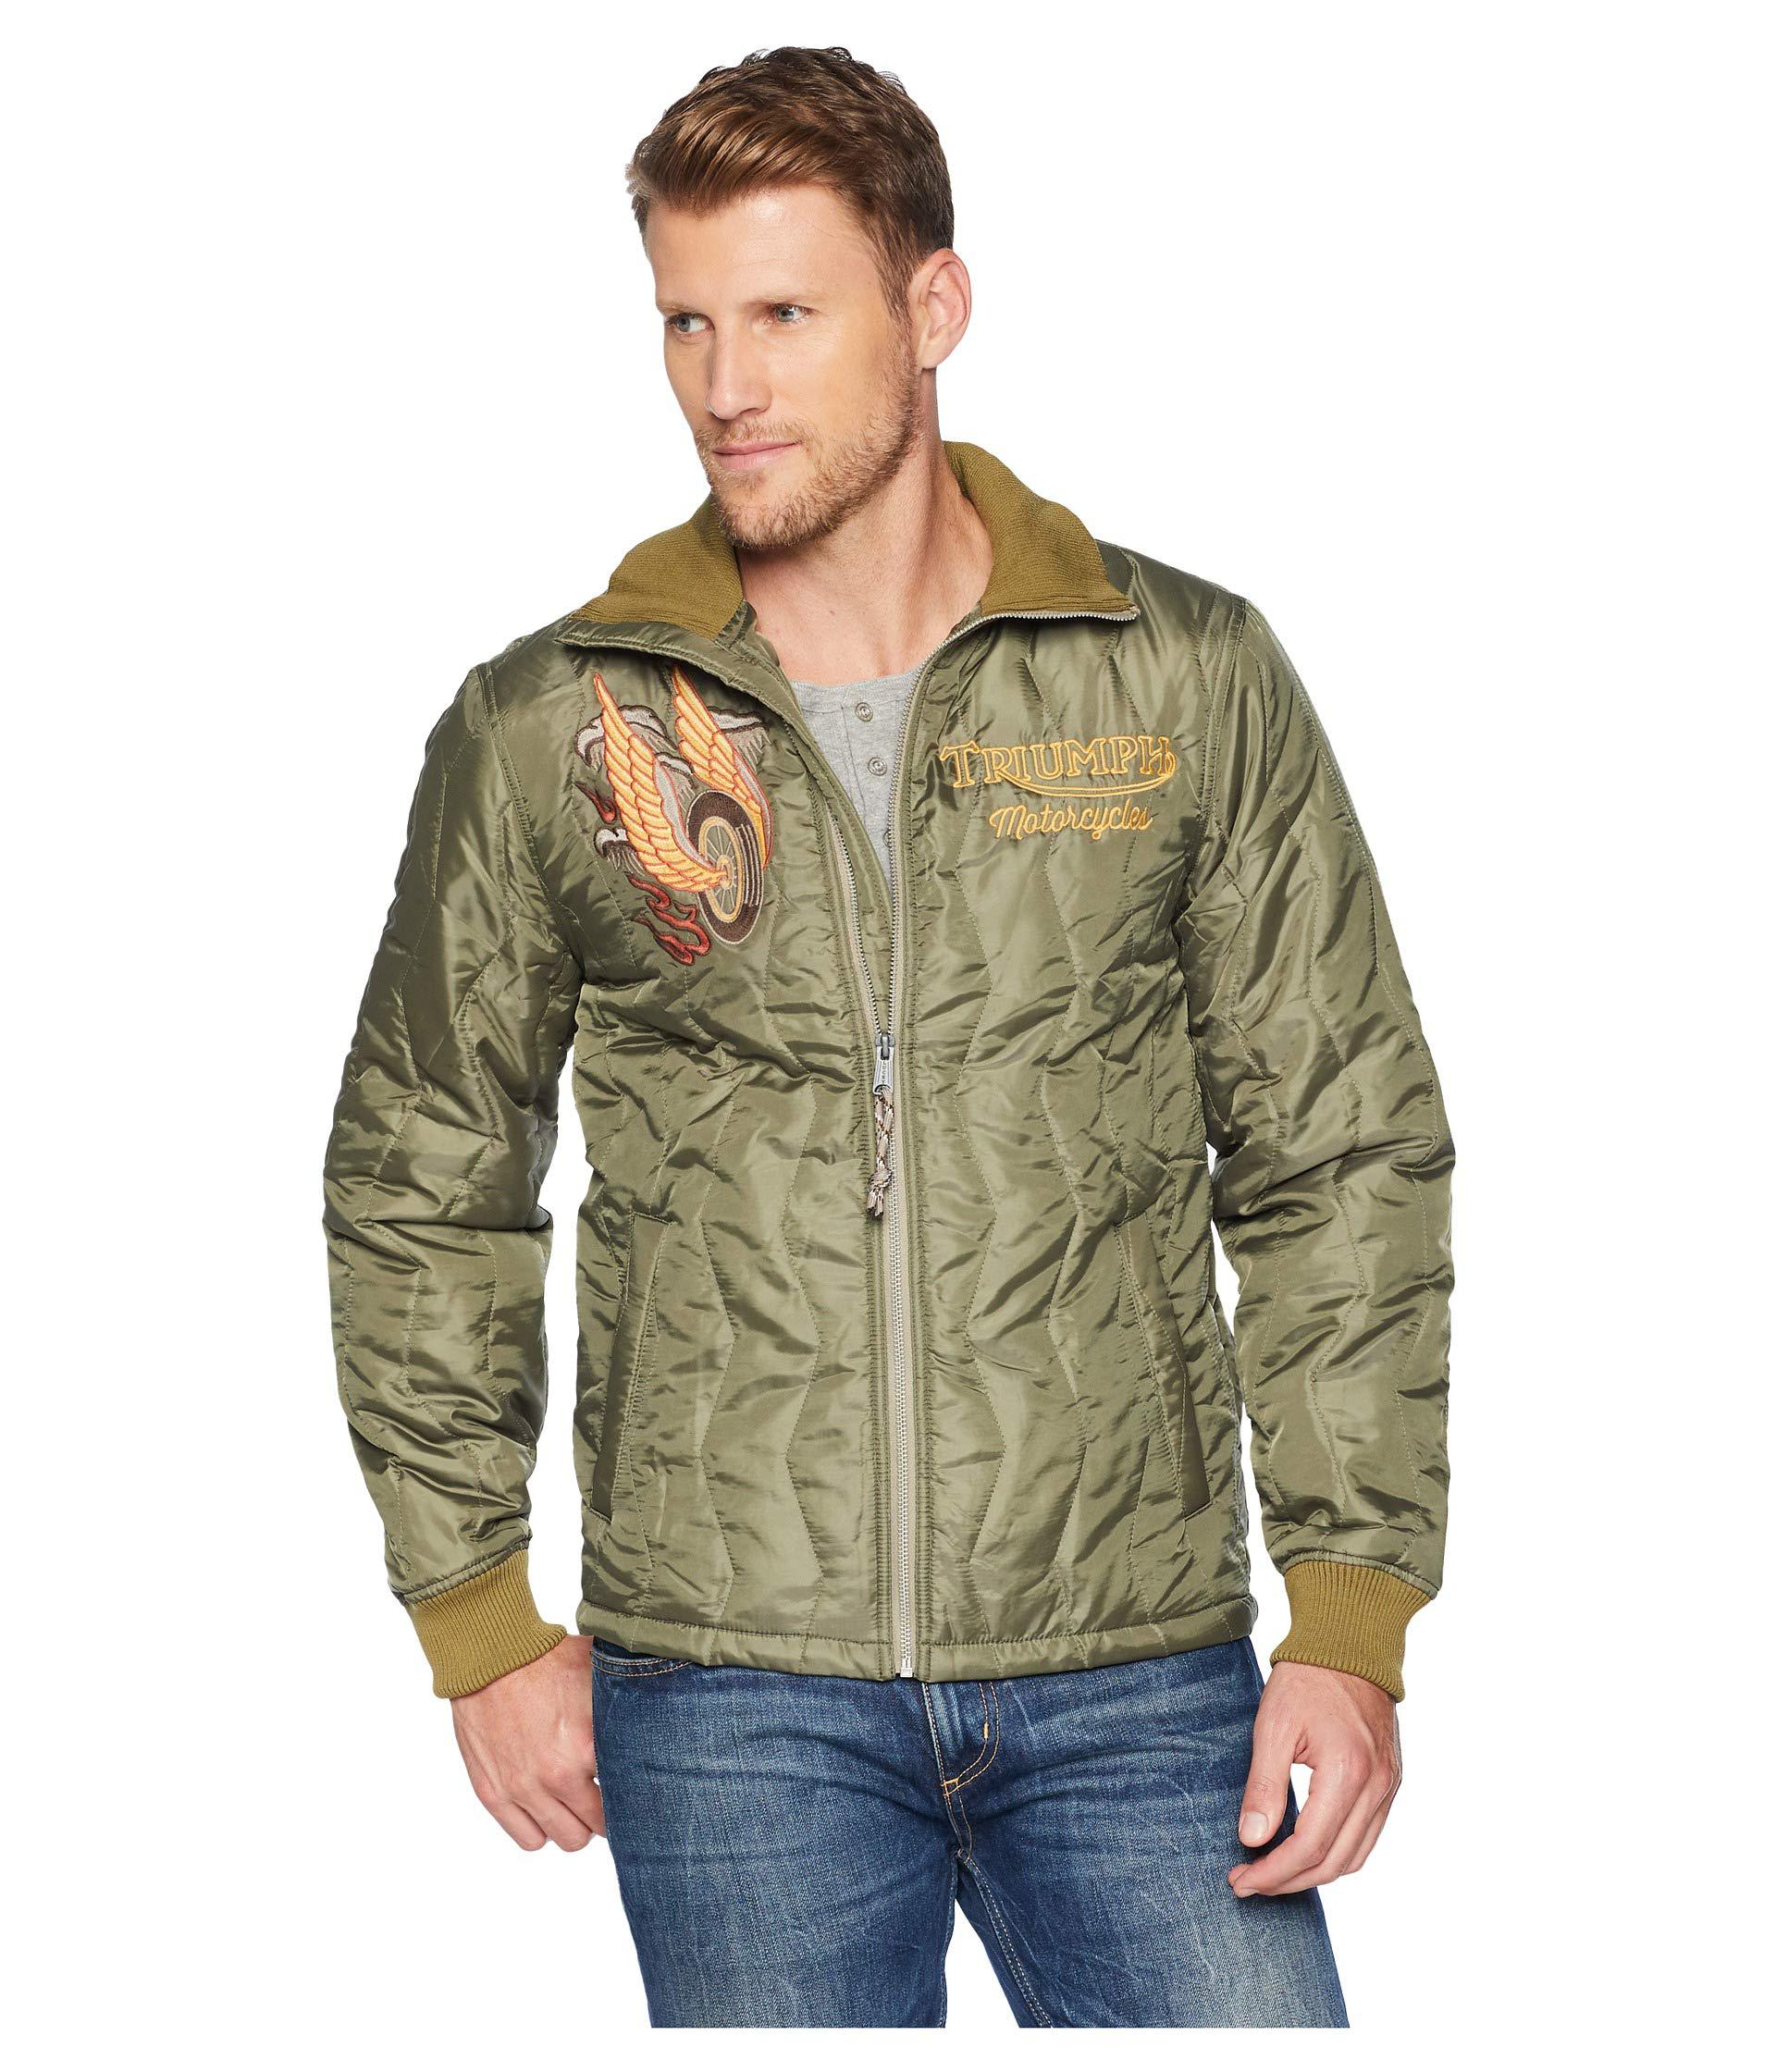 for Tiger Coat Men Triumph Men\'s (olive) in Brand Green Lucky | Jacket Embroidered Lyst